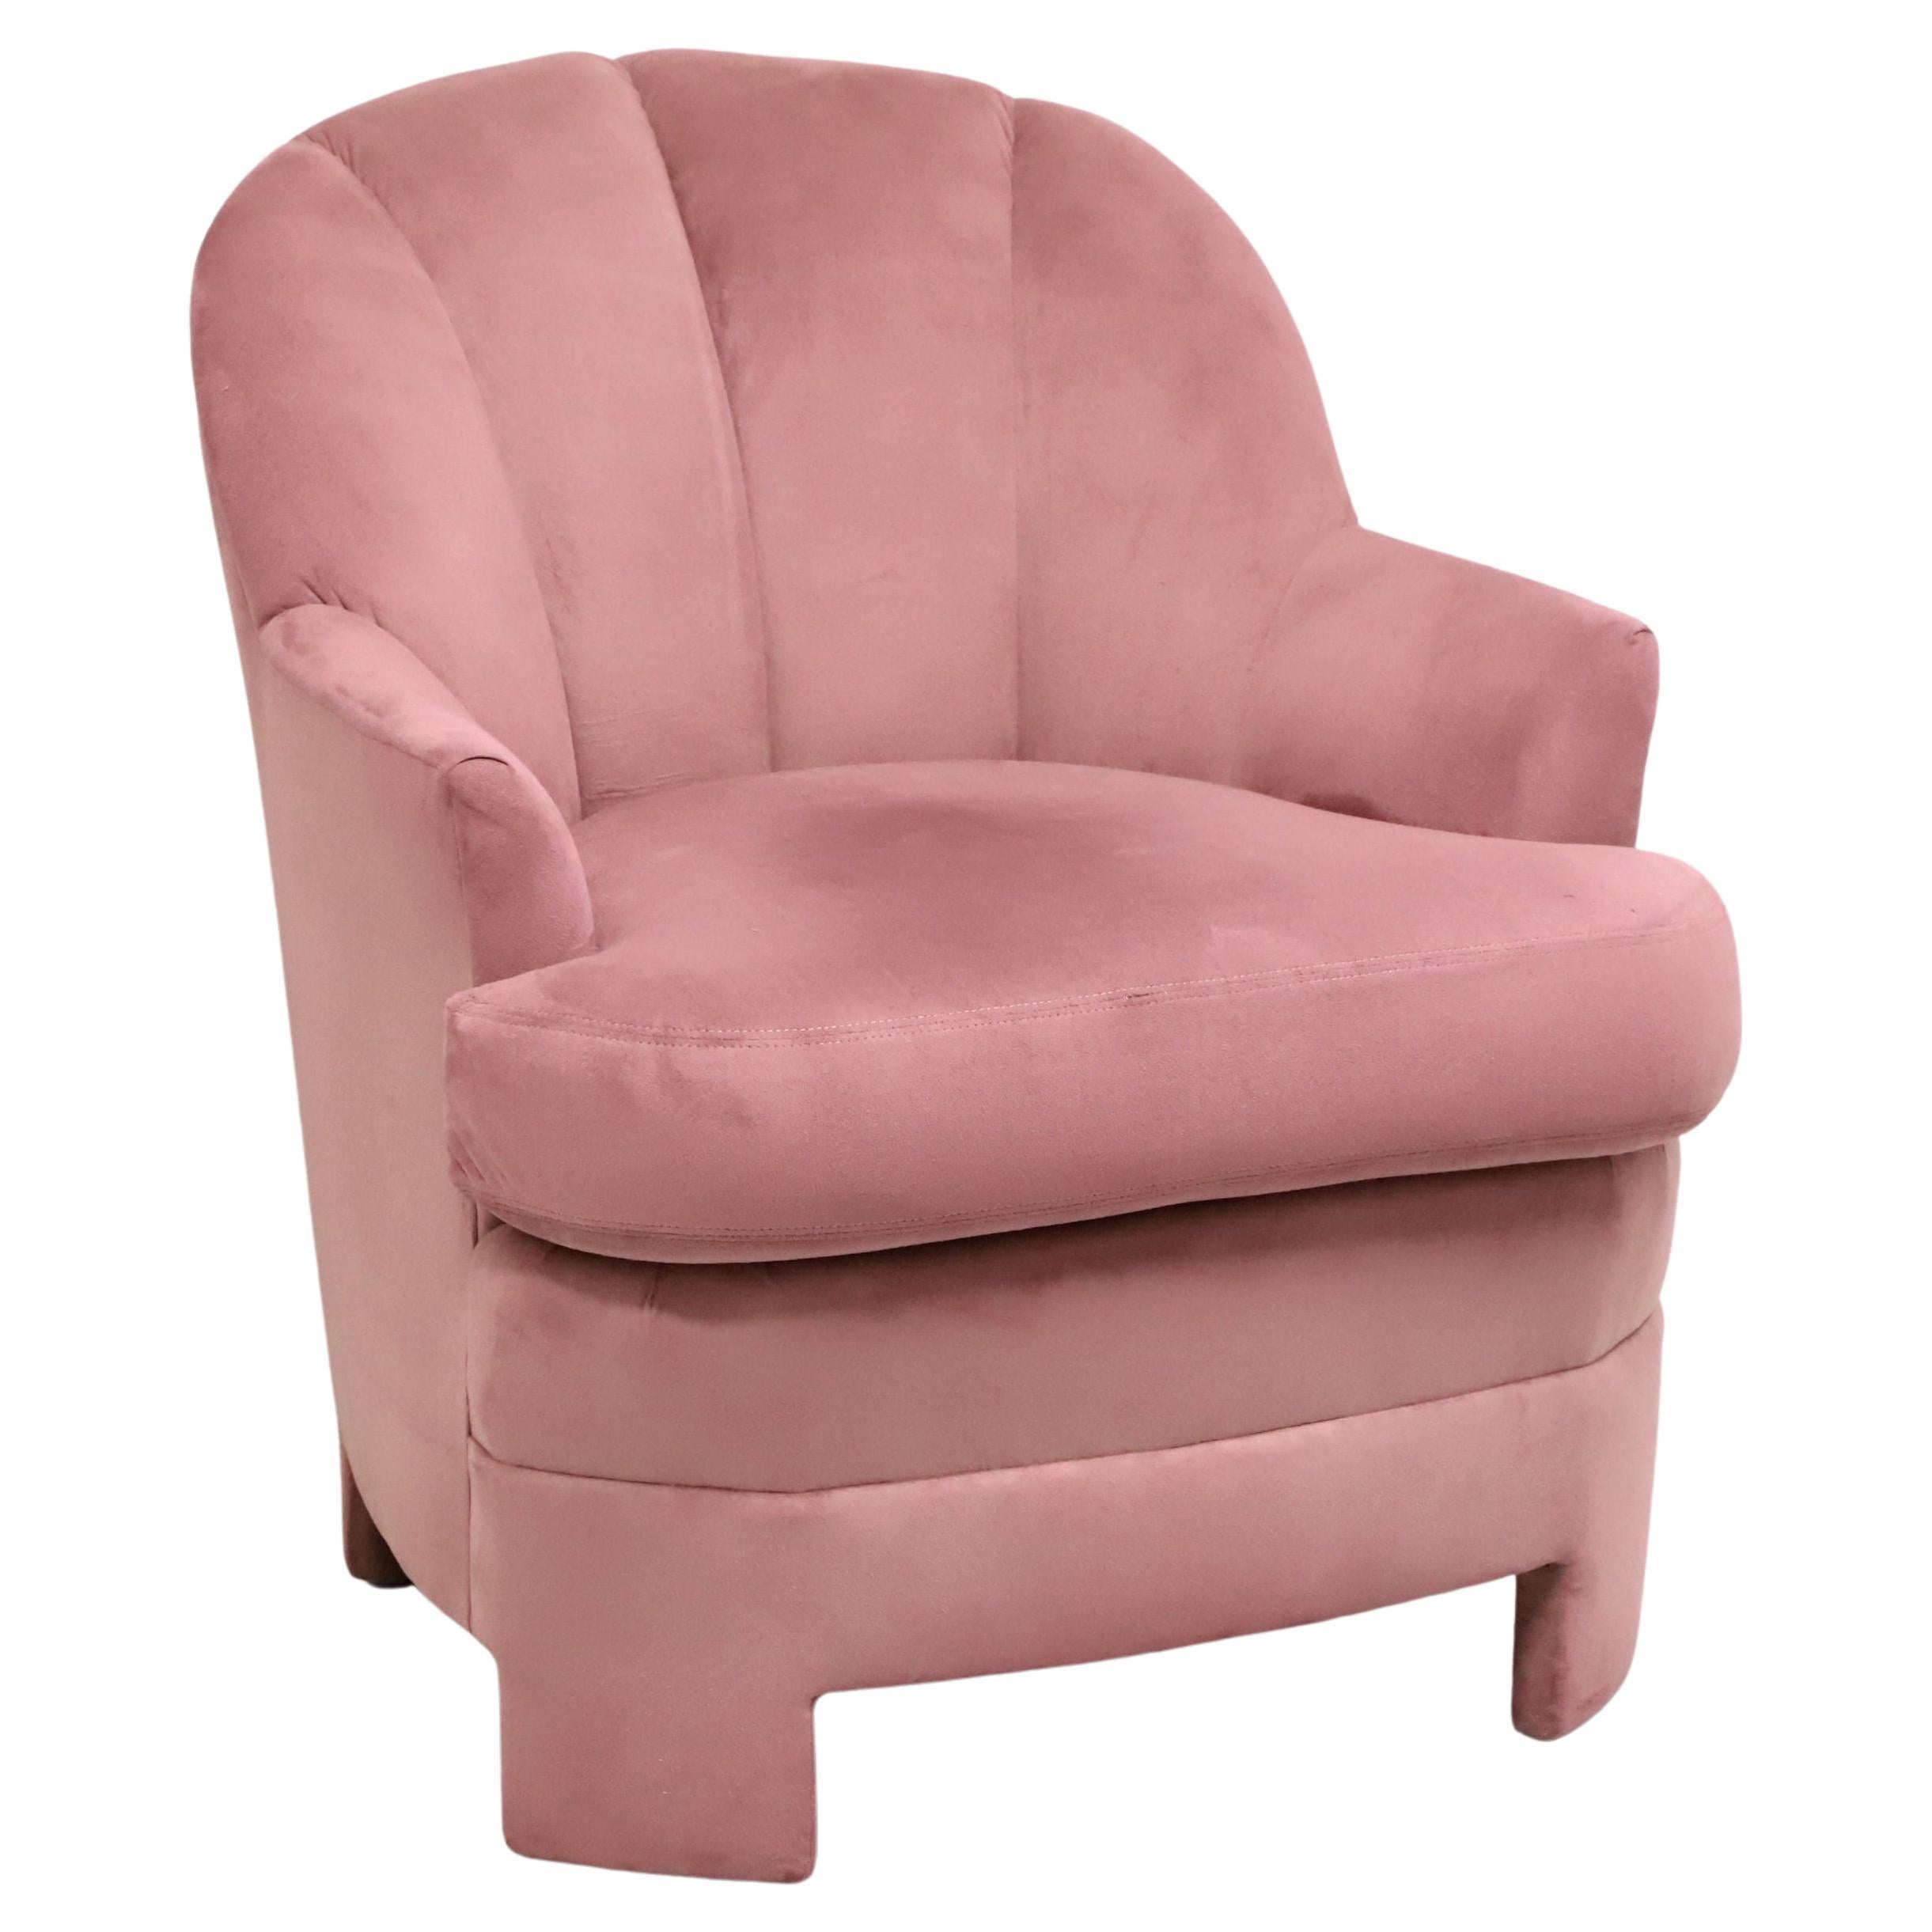 CLASSIC GALLERY Late 20th Century Art Deco Mauve Club Chair For Sale